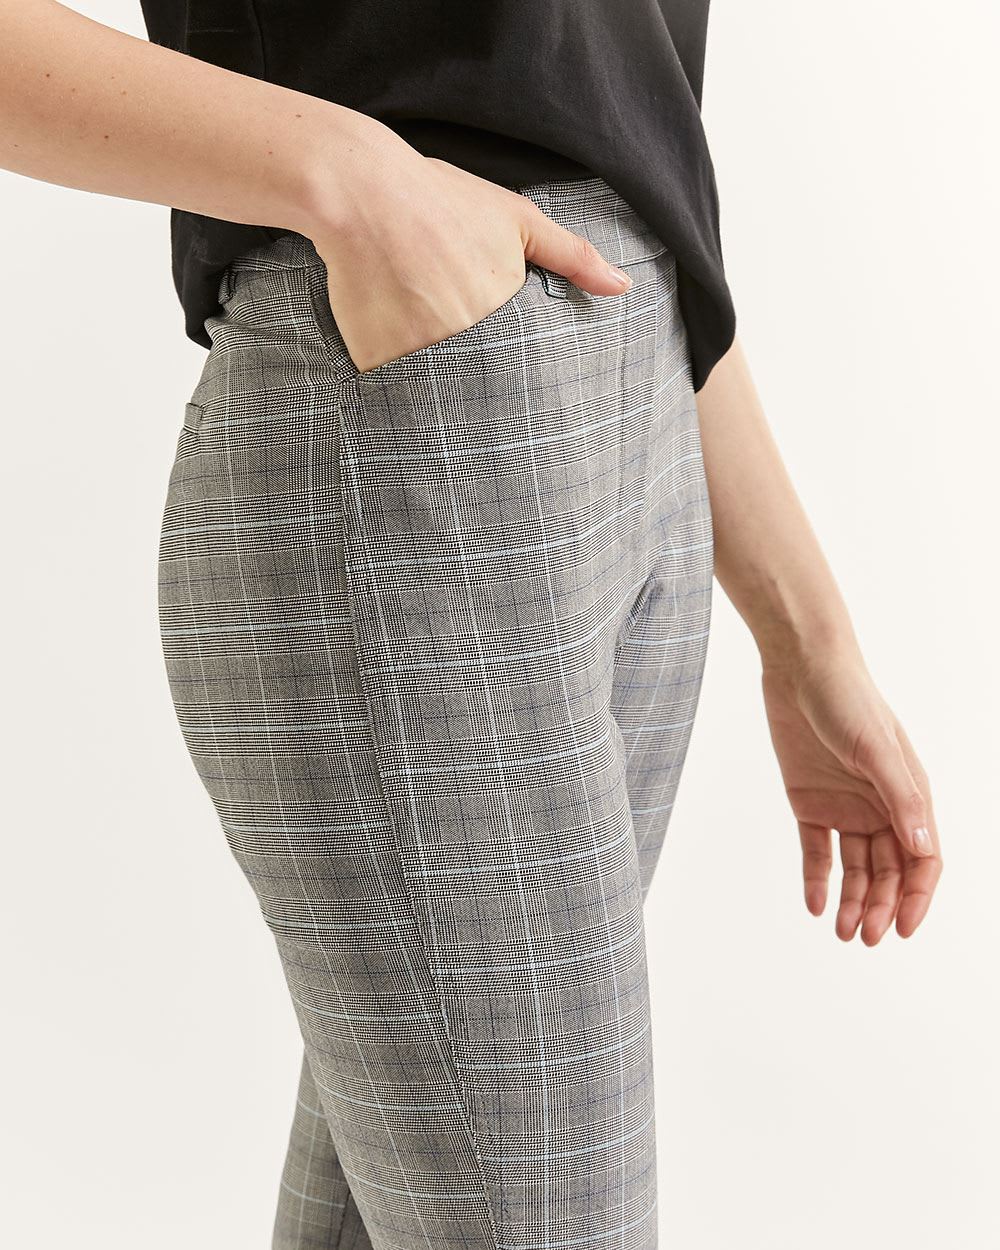 Ankle Pull On Plaid Pants The Iconic - Petite